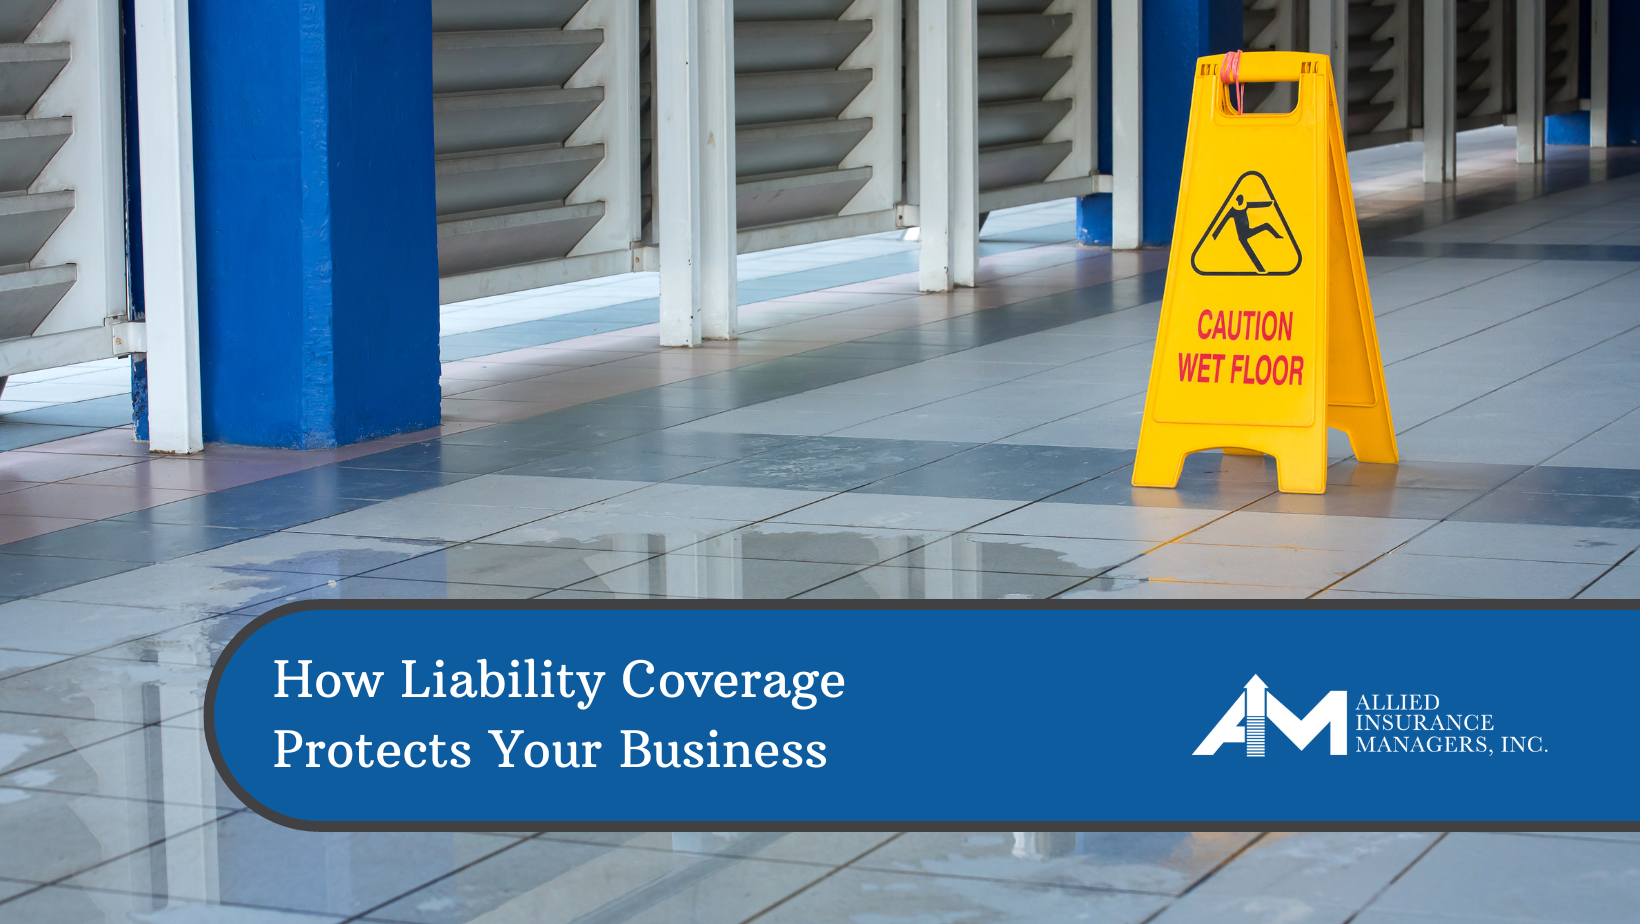 Business liability coverage can protect your business in a variety of ways against formal lawsuits or third-party claims. Learn more here!